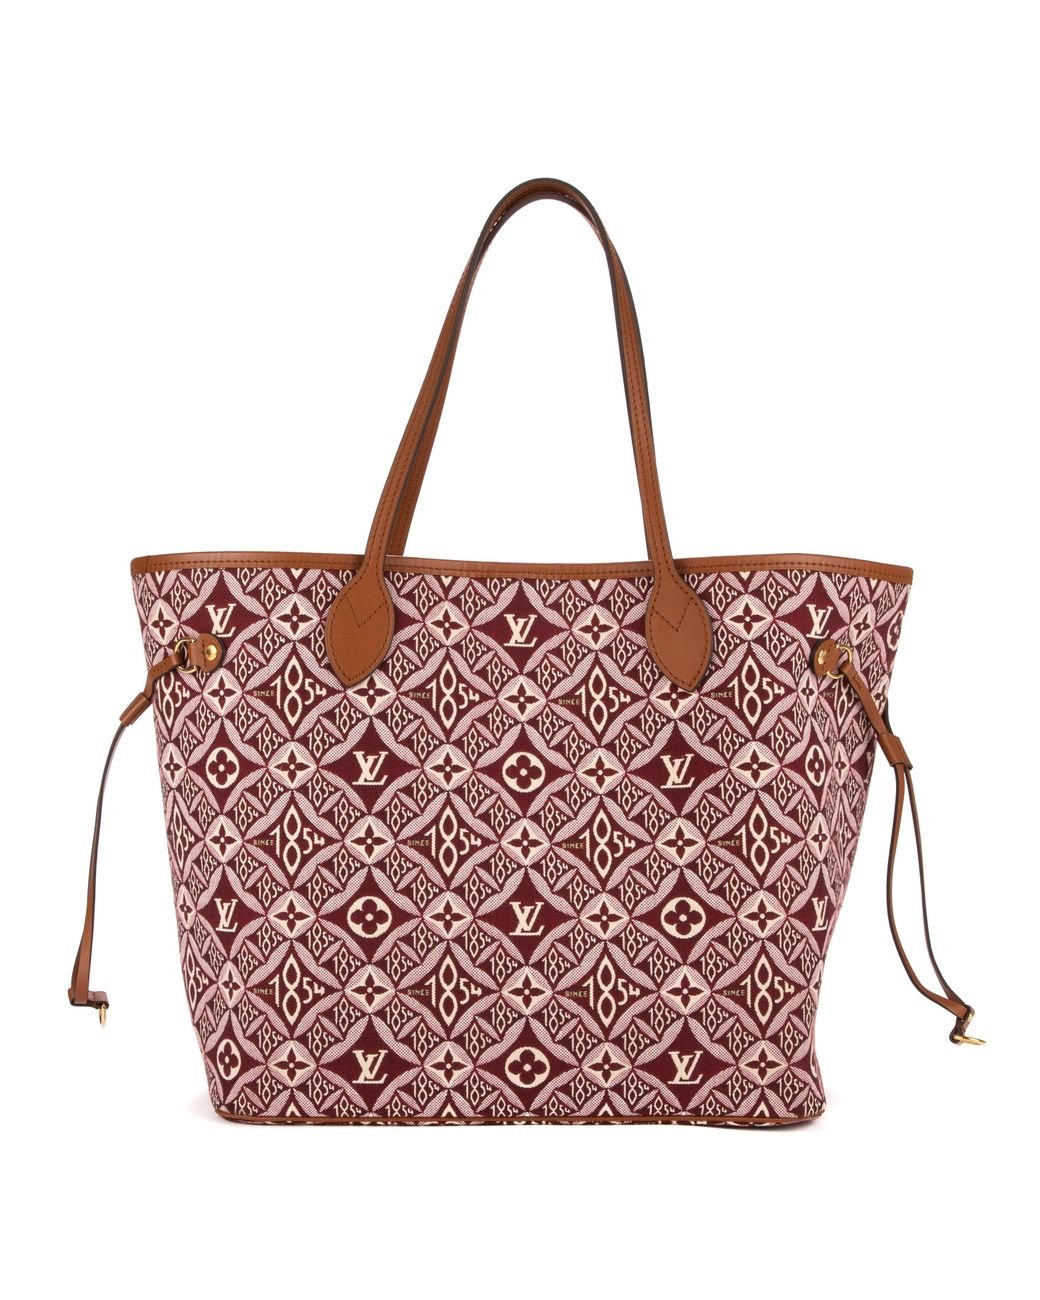 Louis Vuitton Ltd. Ed. since 1854 Neverfull Mm in Red